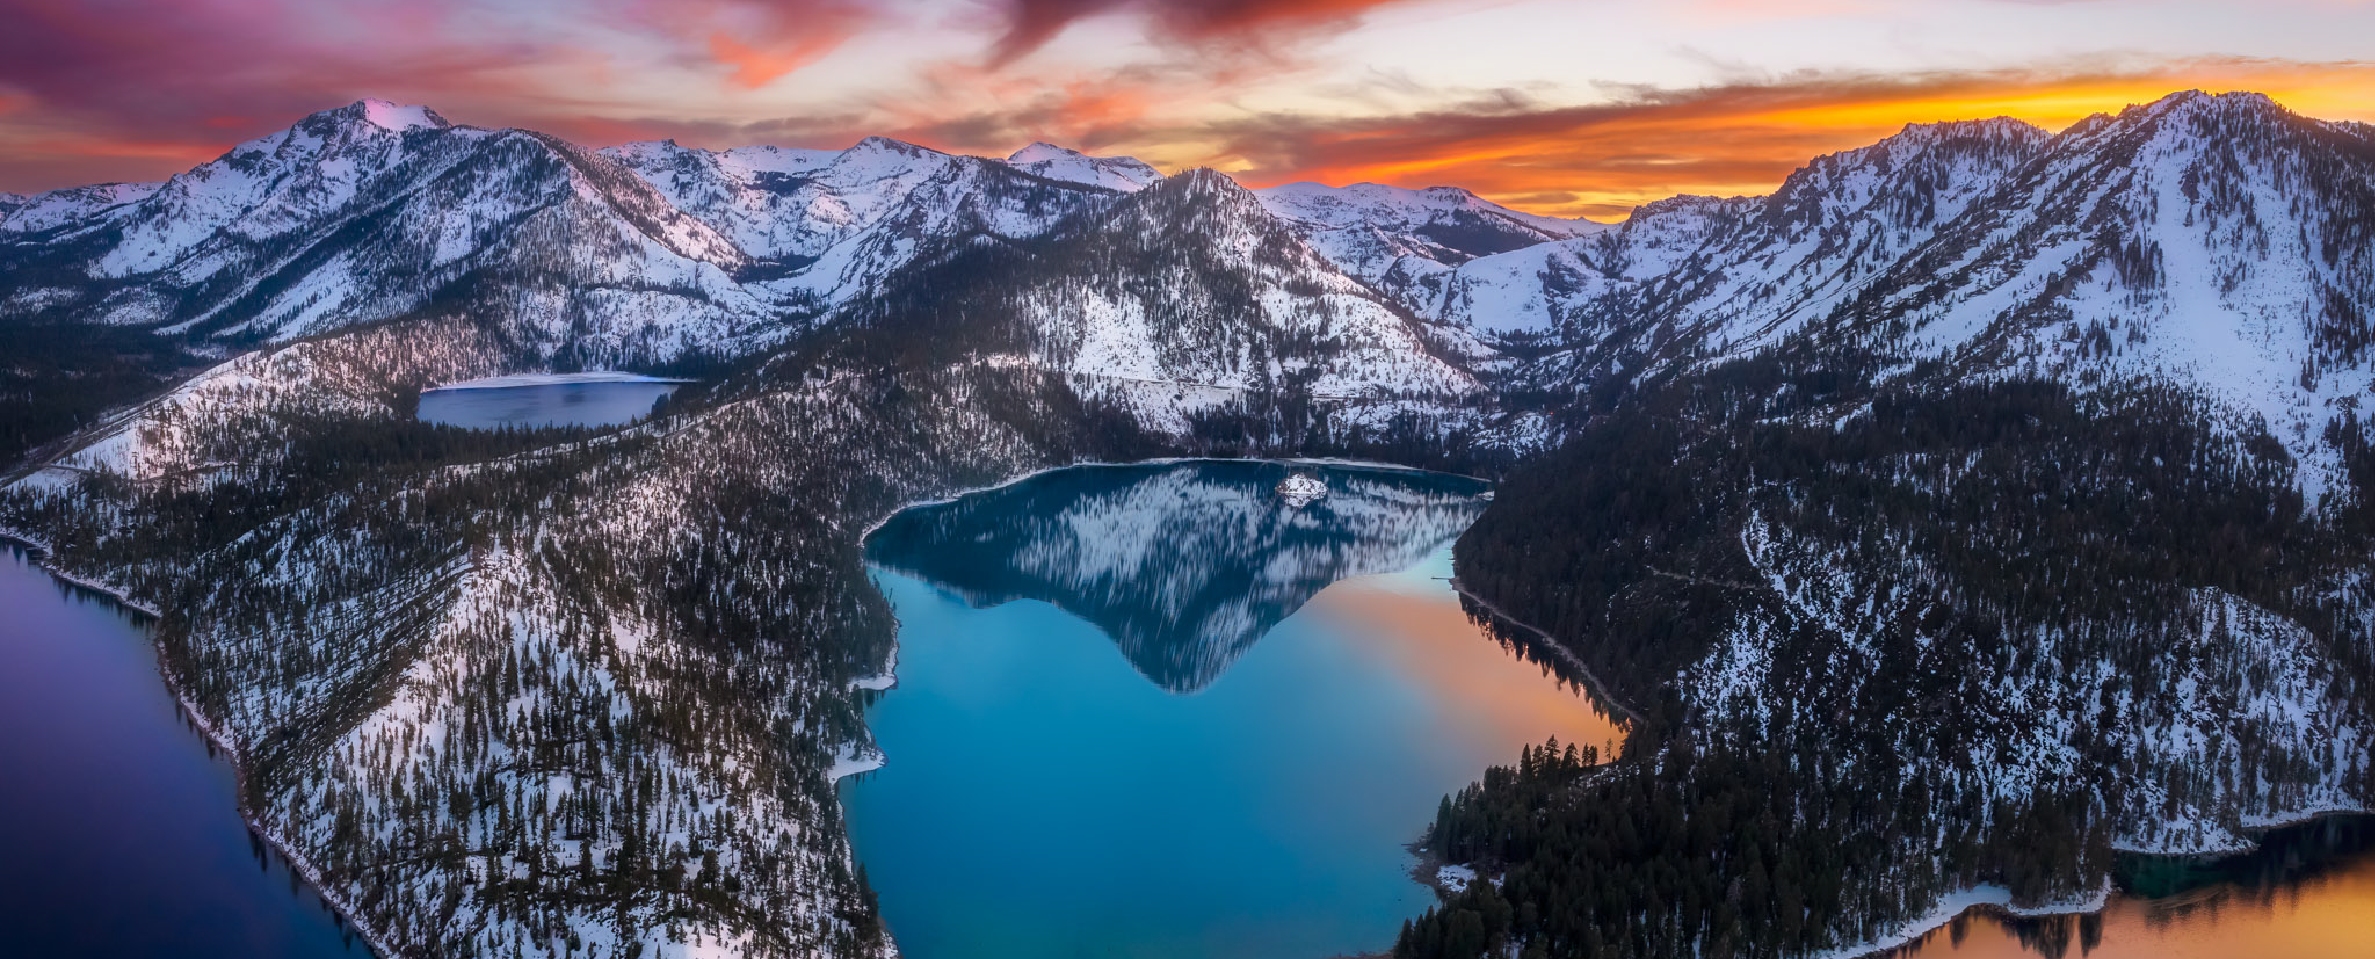 Alpenglow Gallery Supports the Tahoe Fund